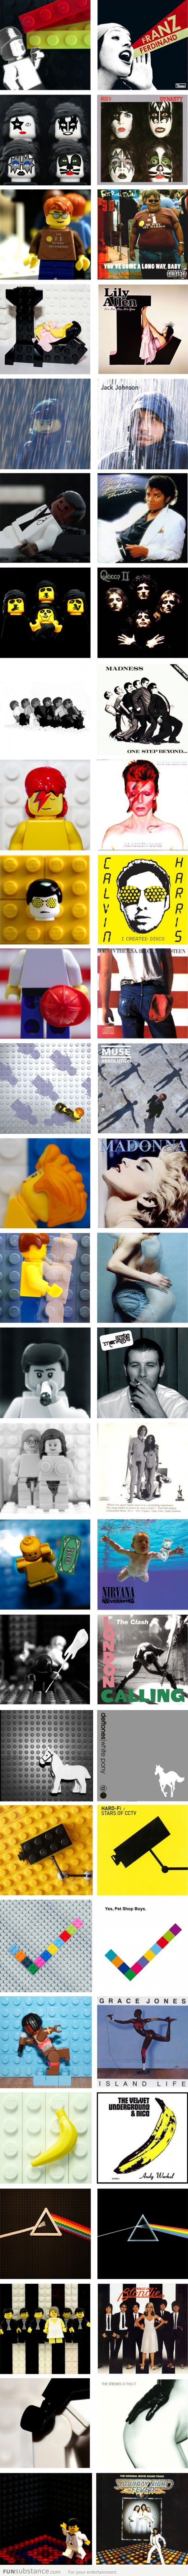 Awesome Lego Album Covers